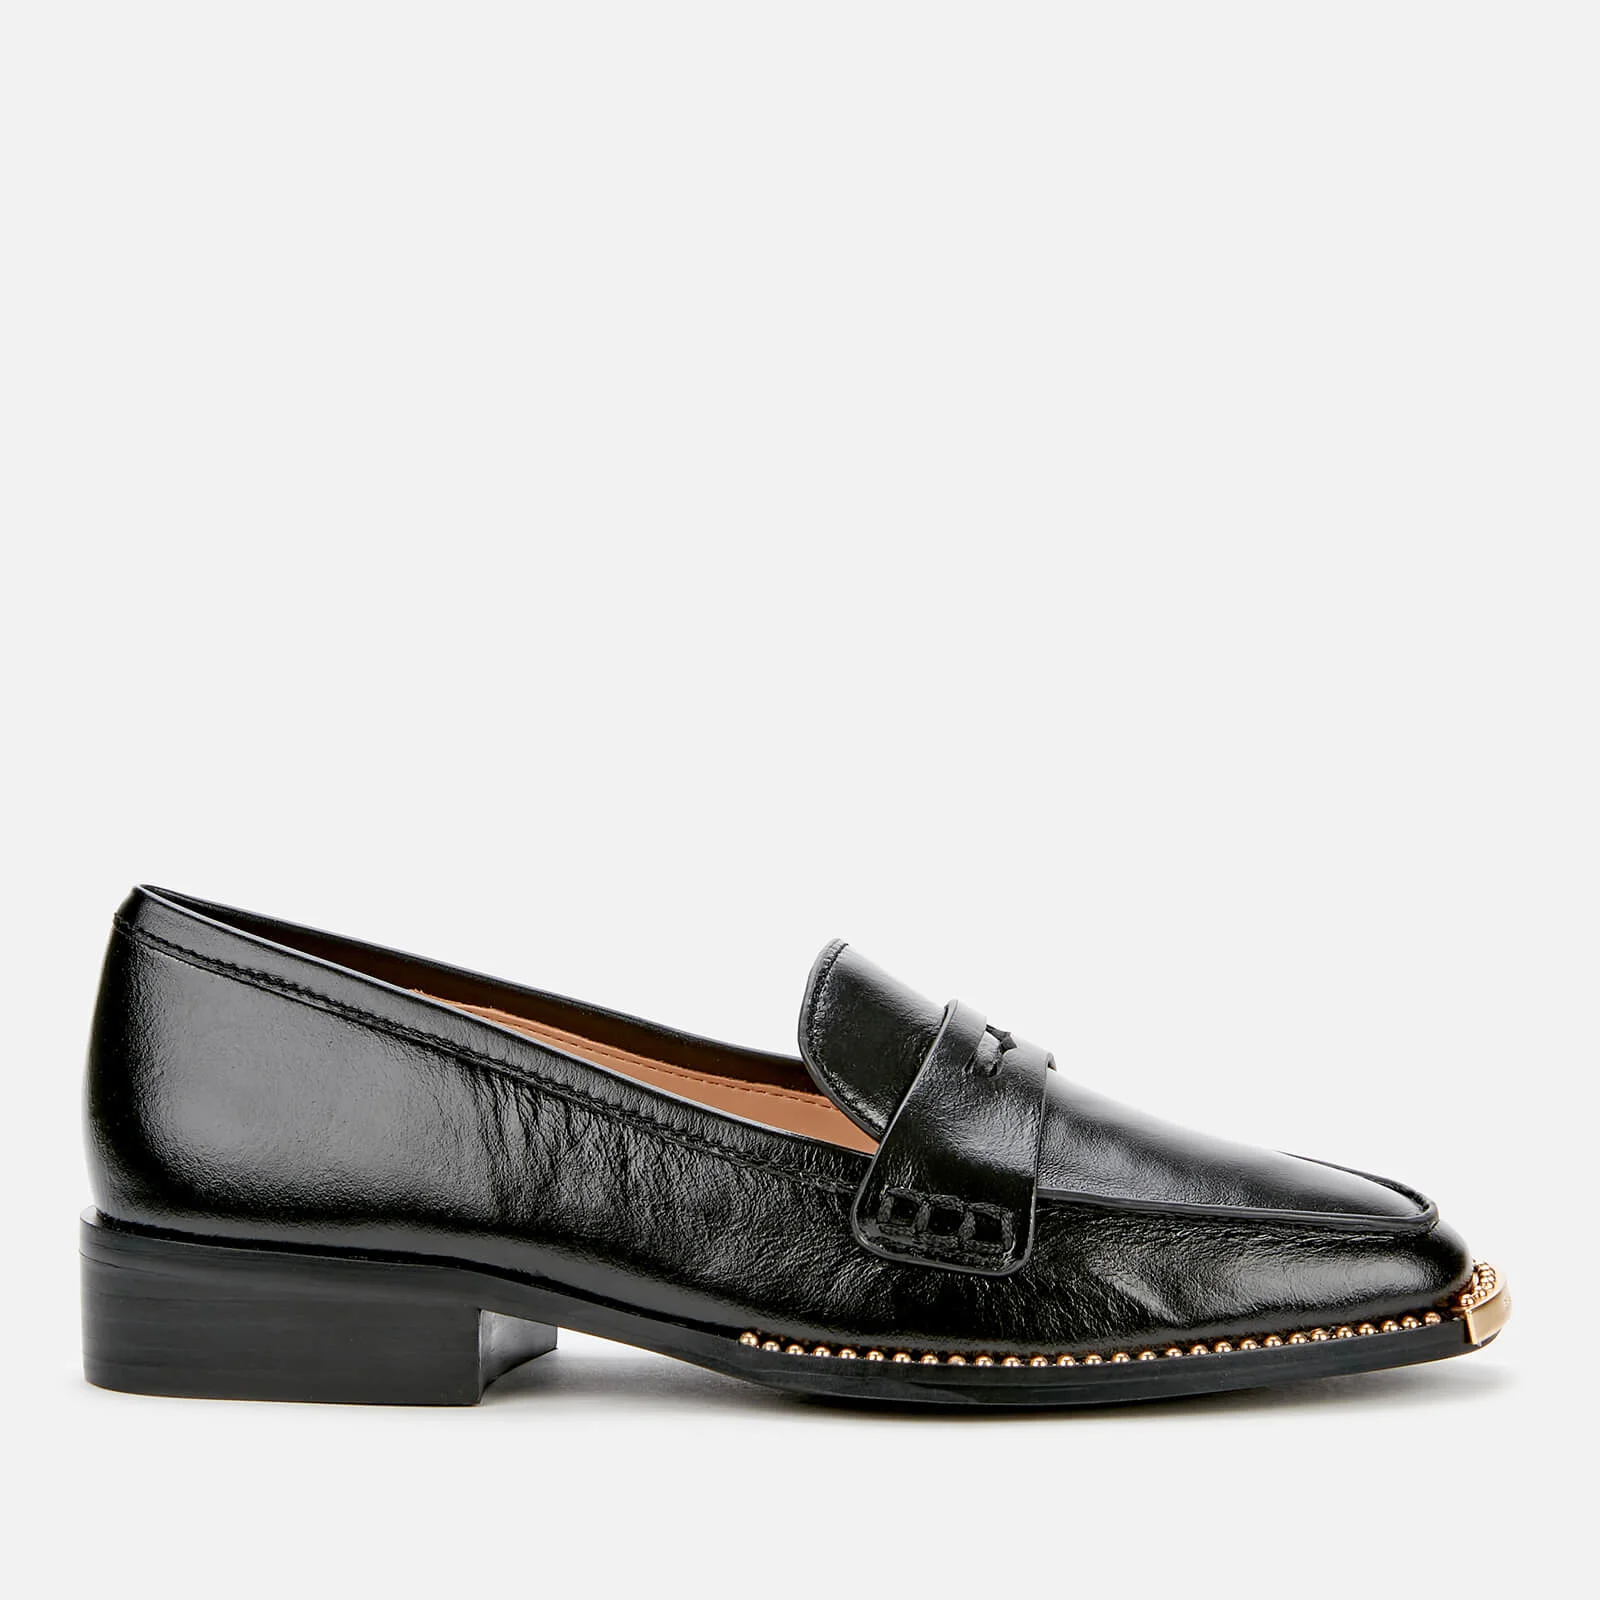 Coach Women's Nelli Leather Loafers - Black Image 1